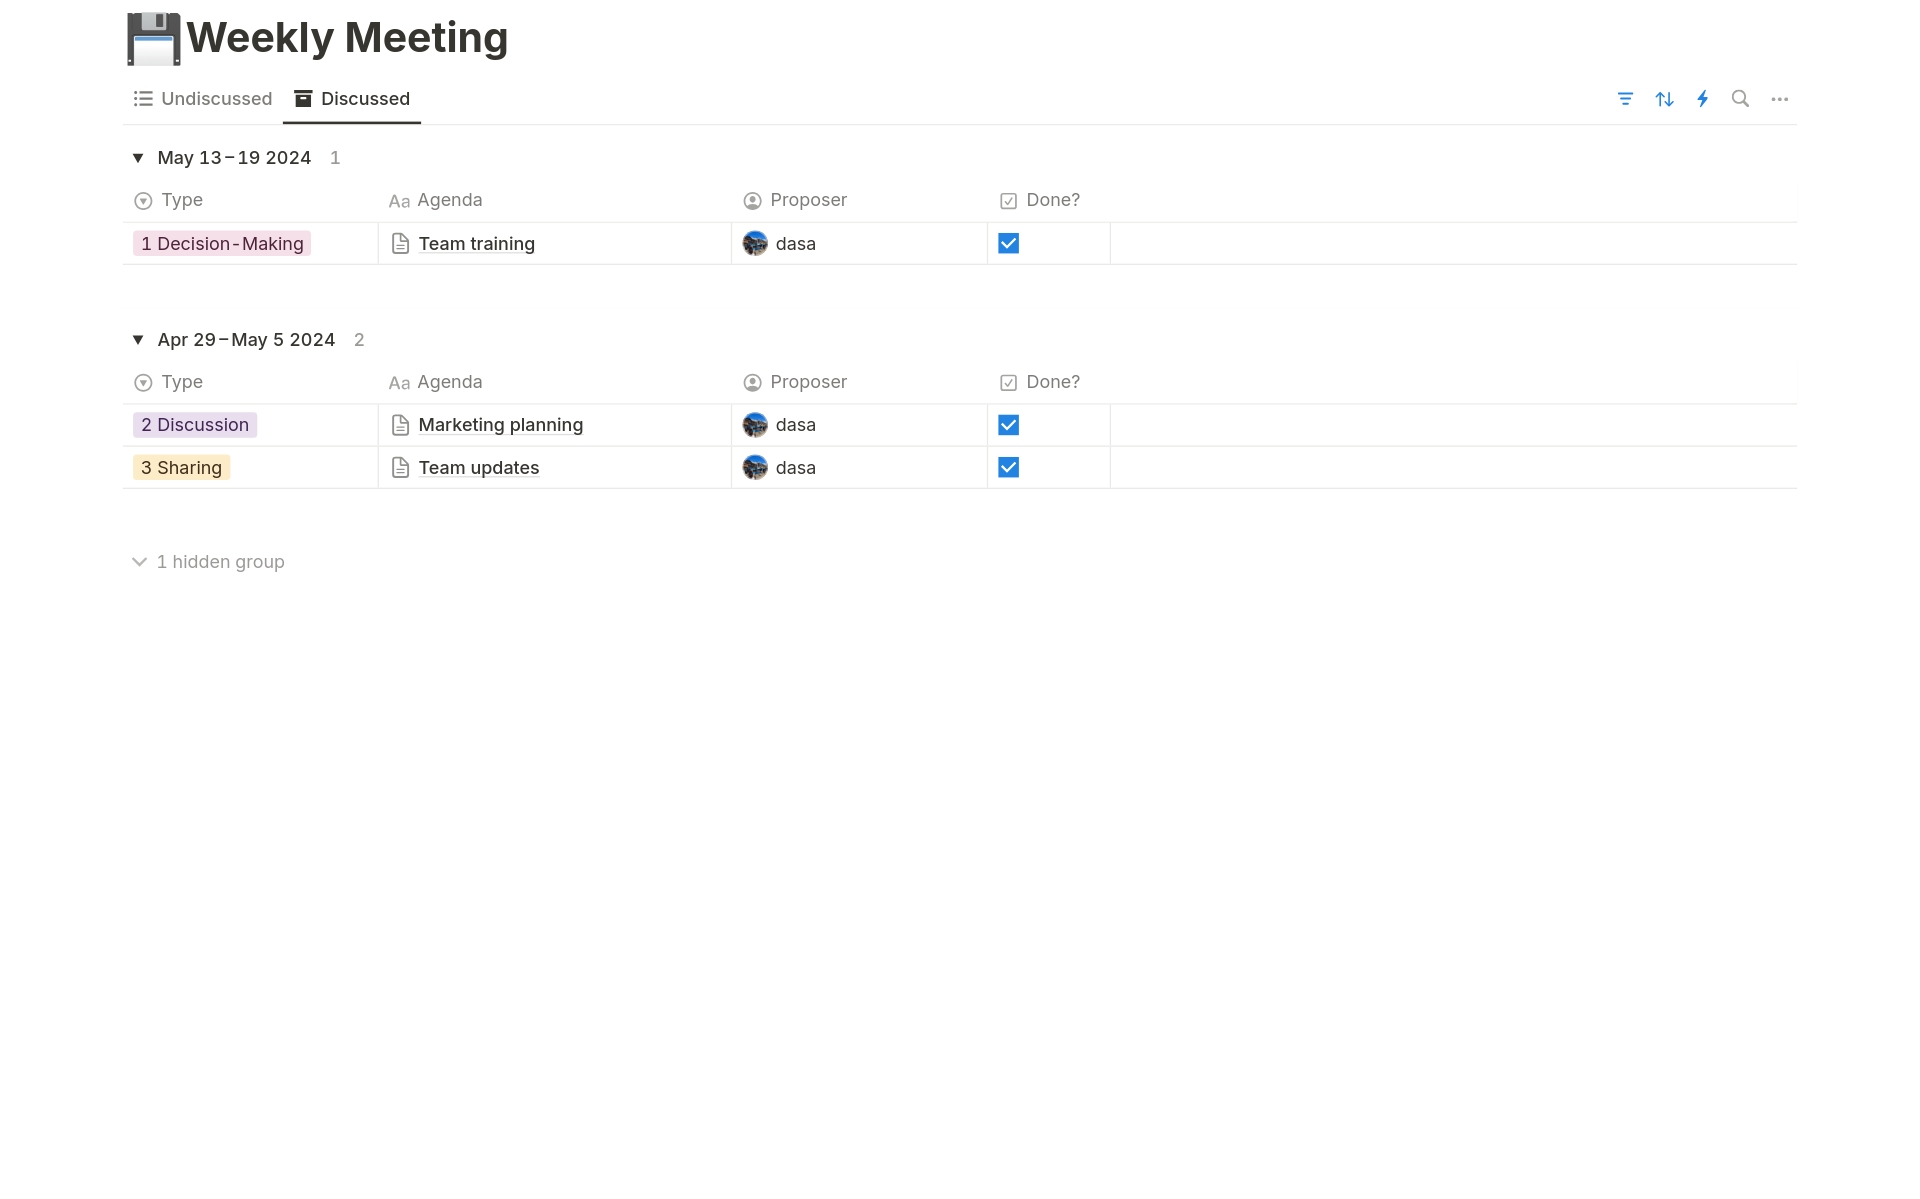 This template is designed for weekly meetings. It allows you to easily prepare agendas and efficiently organize weekly meetings. You can quickly grasp and manage previously discussed agendas at a glance.